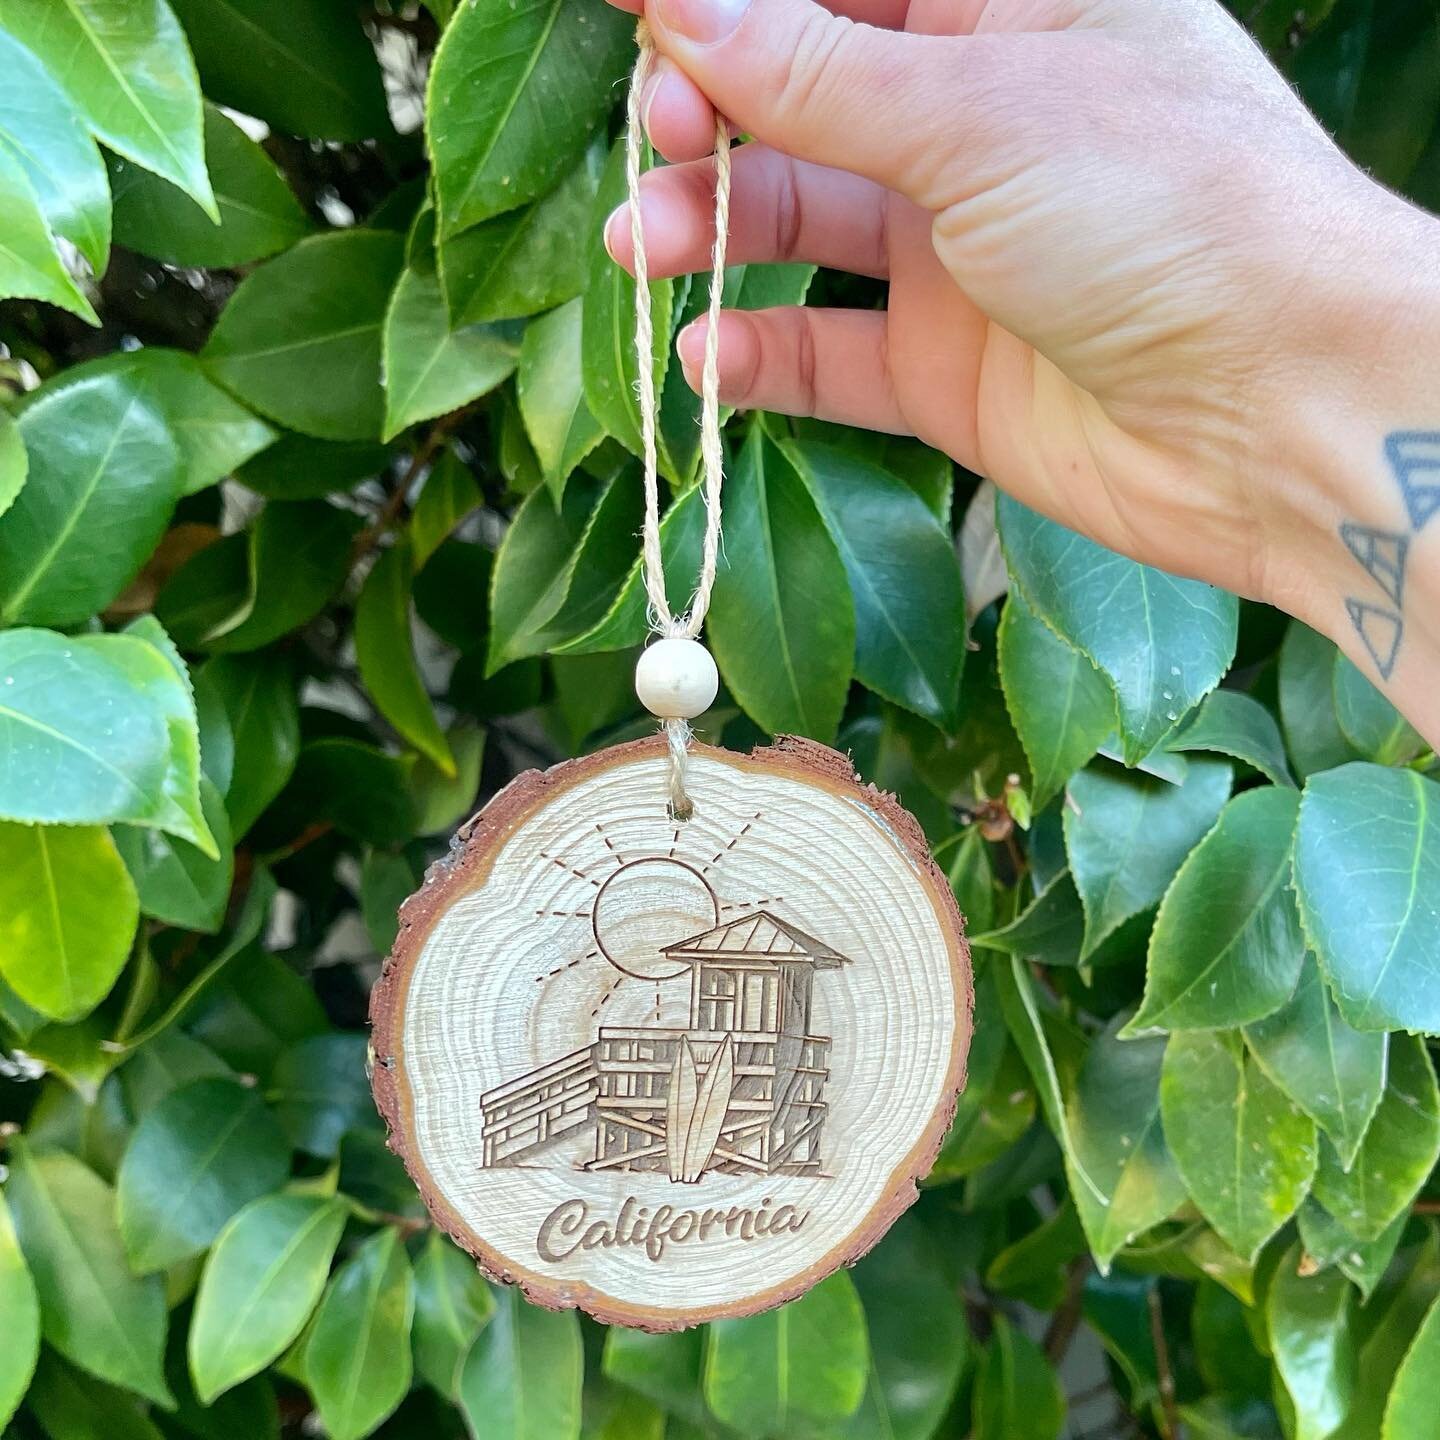 California Tree Ornaments 
FOR SALE!!!
$15 each - ✨ Limited Edition ✨

Tag a friend who would love this in their home!

#California #CaliforniaLife #BeachLife #CaliforniaChristmasOrnaments #Californiaart #SurfingCalifornia #Calilife #CaliforniaIsMyHo